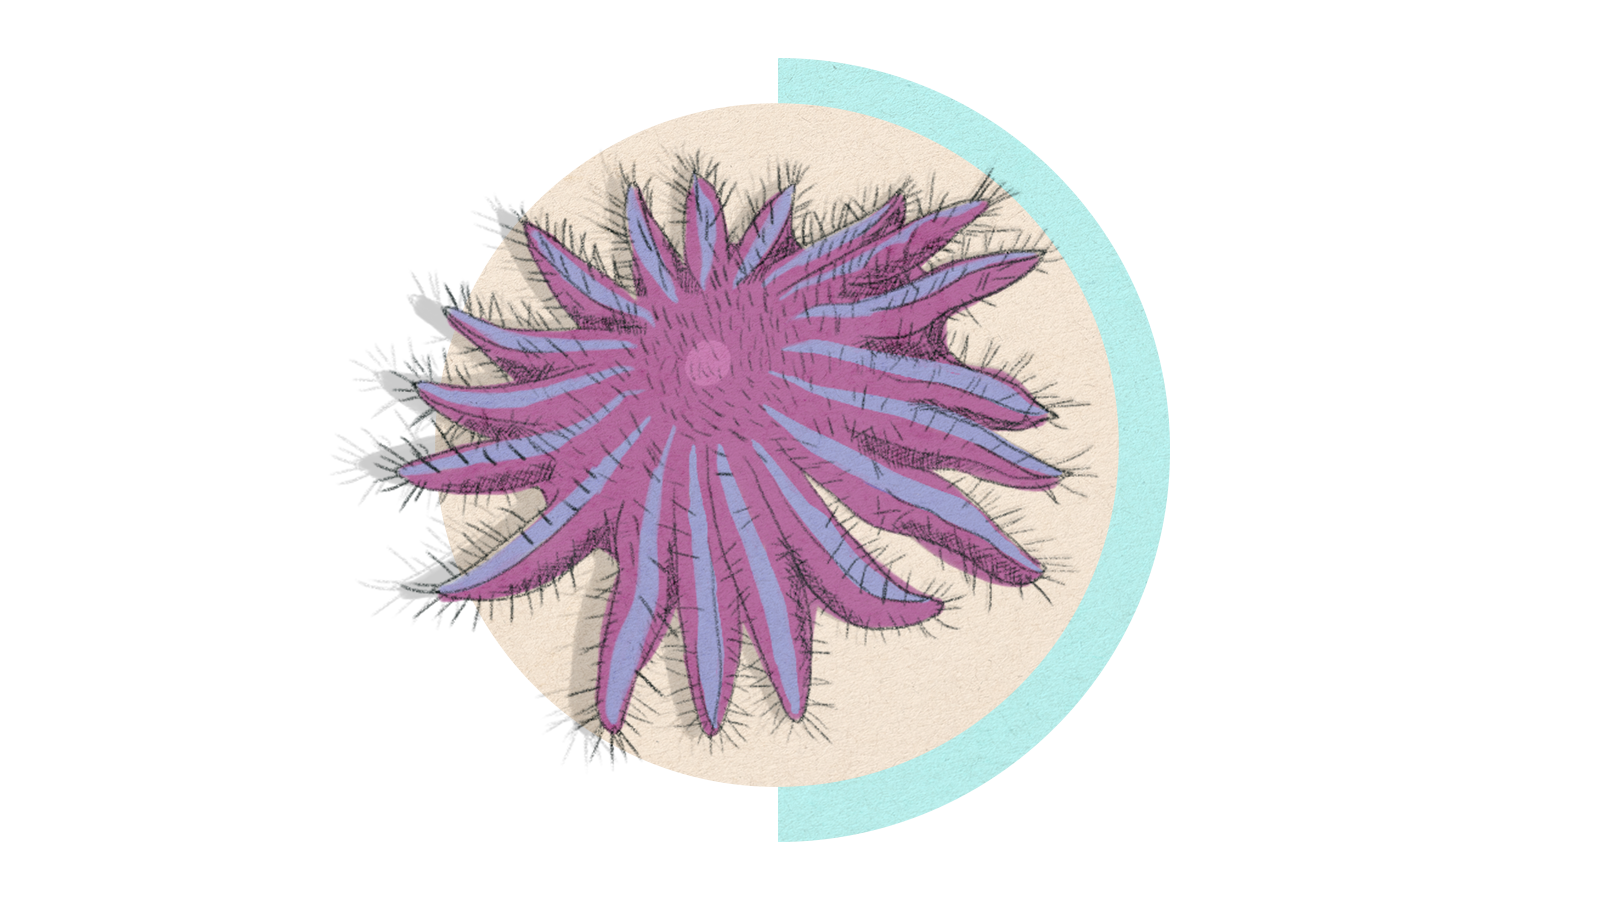 Illustration of a purple crown of thorns on a circle background.